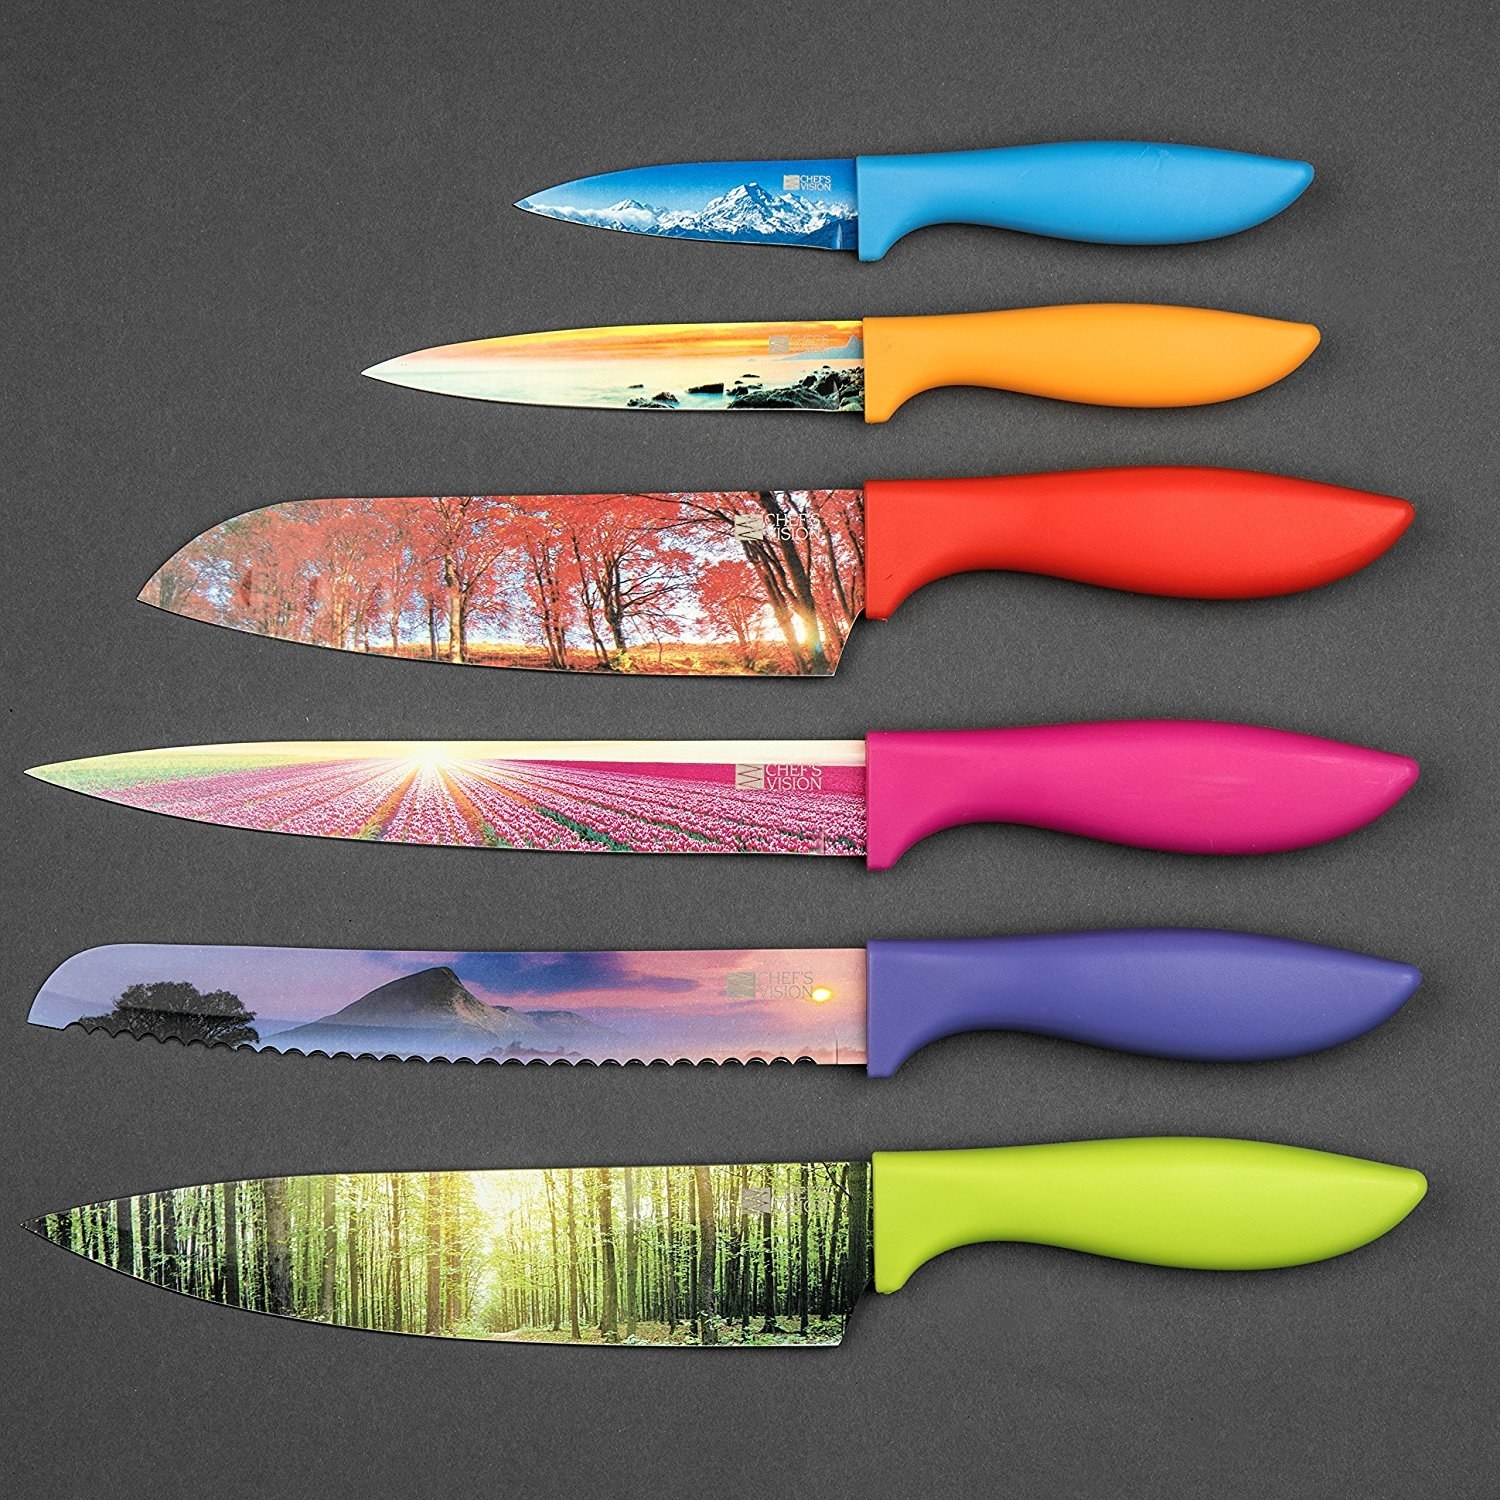 Rainbow Titanium Knife Set, Non Stick Thick and Sharp Stainless Steel 15  Pcs Cutlery Kitchen Knives Set with Acrylic Block, Chef Quality for Home 